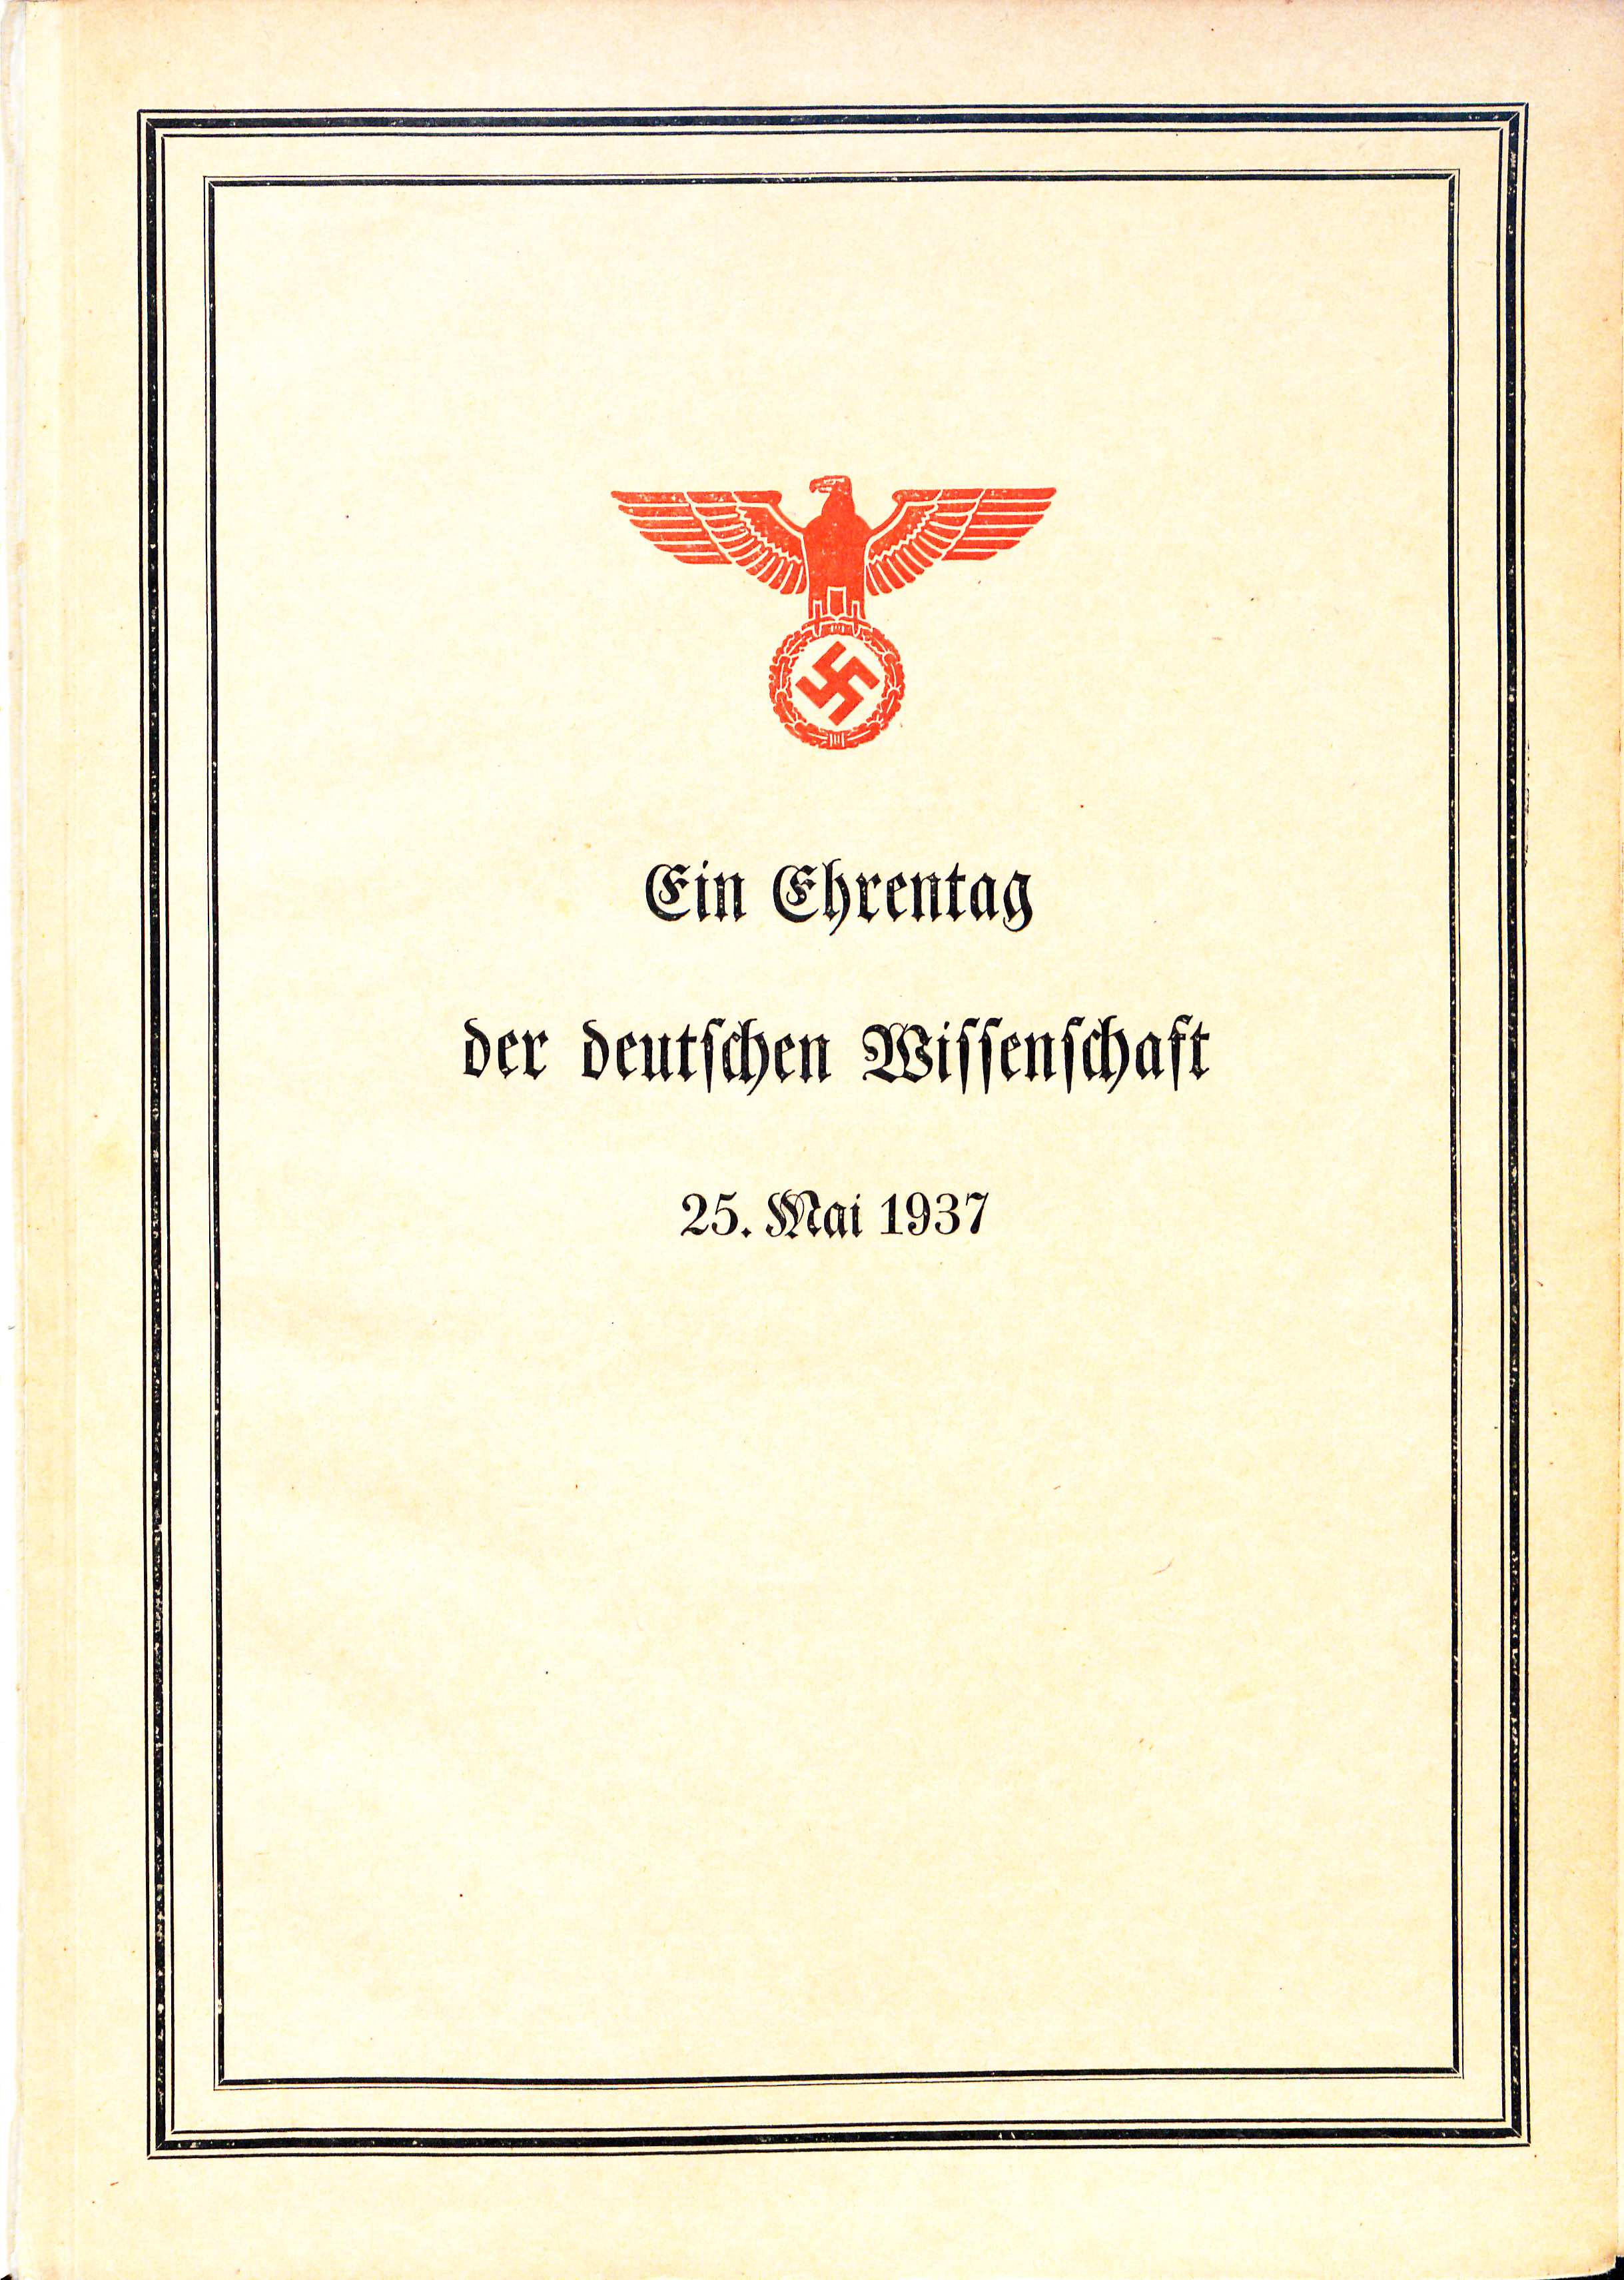 The cover page of the Festschrift (commemorative publication) on the establishment of the Reichsforschungsrat